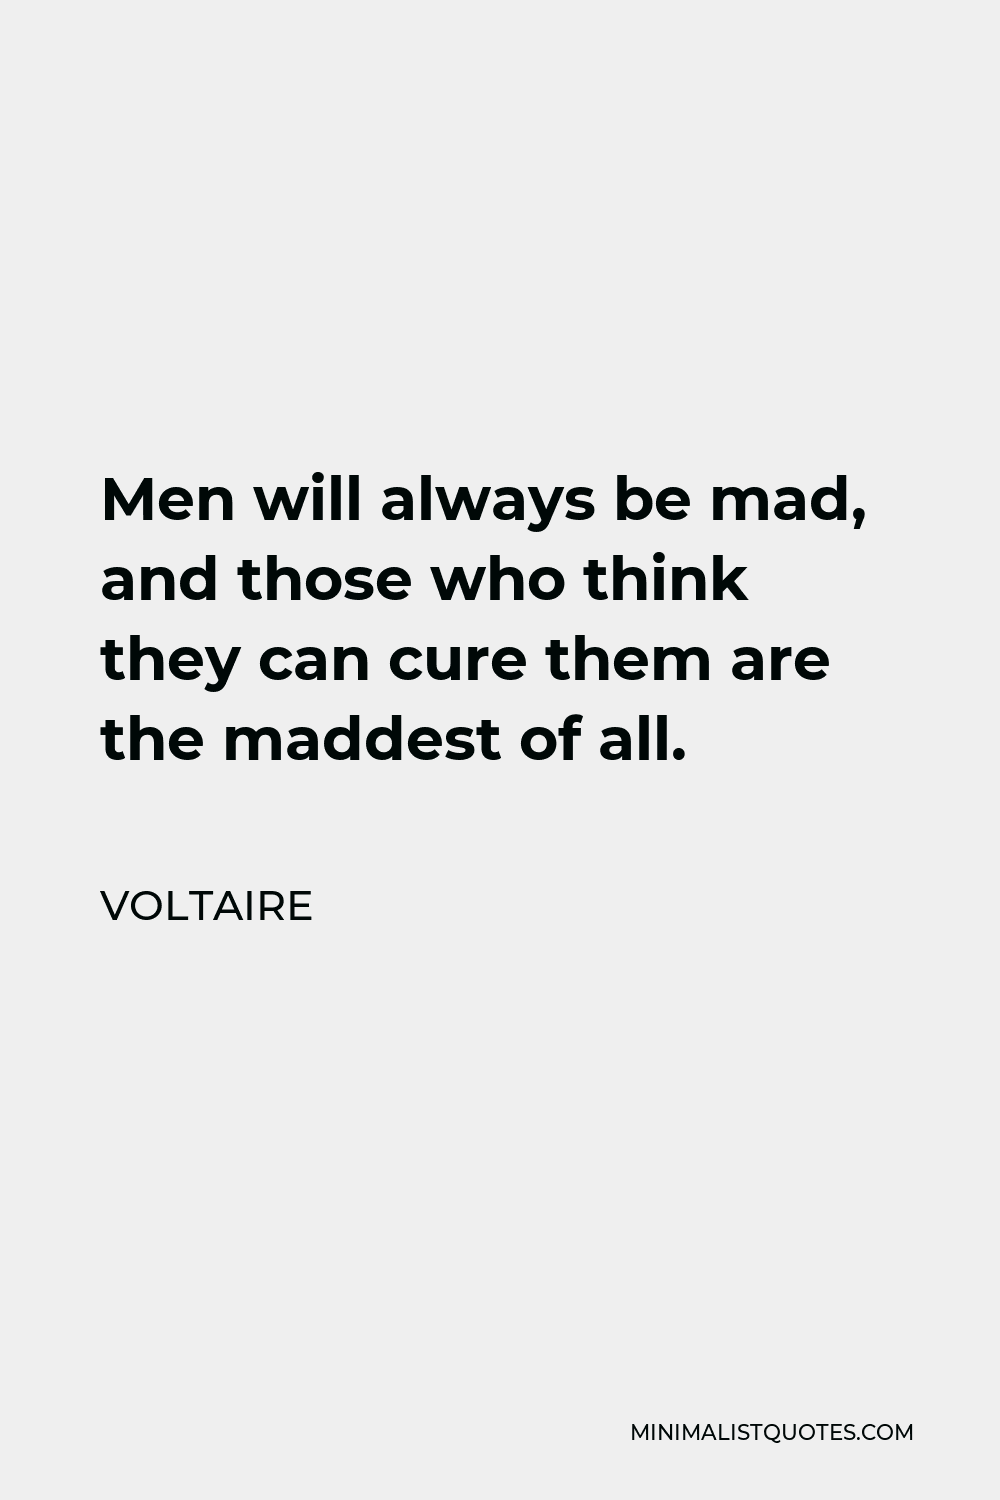 Voltaire Quote - Men will always be mad, and those who think they can cure them are the maddest of all.